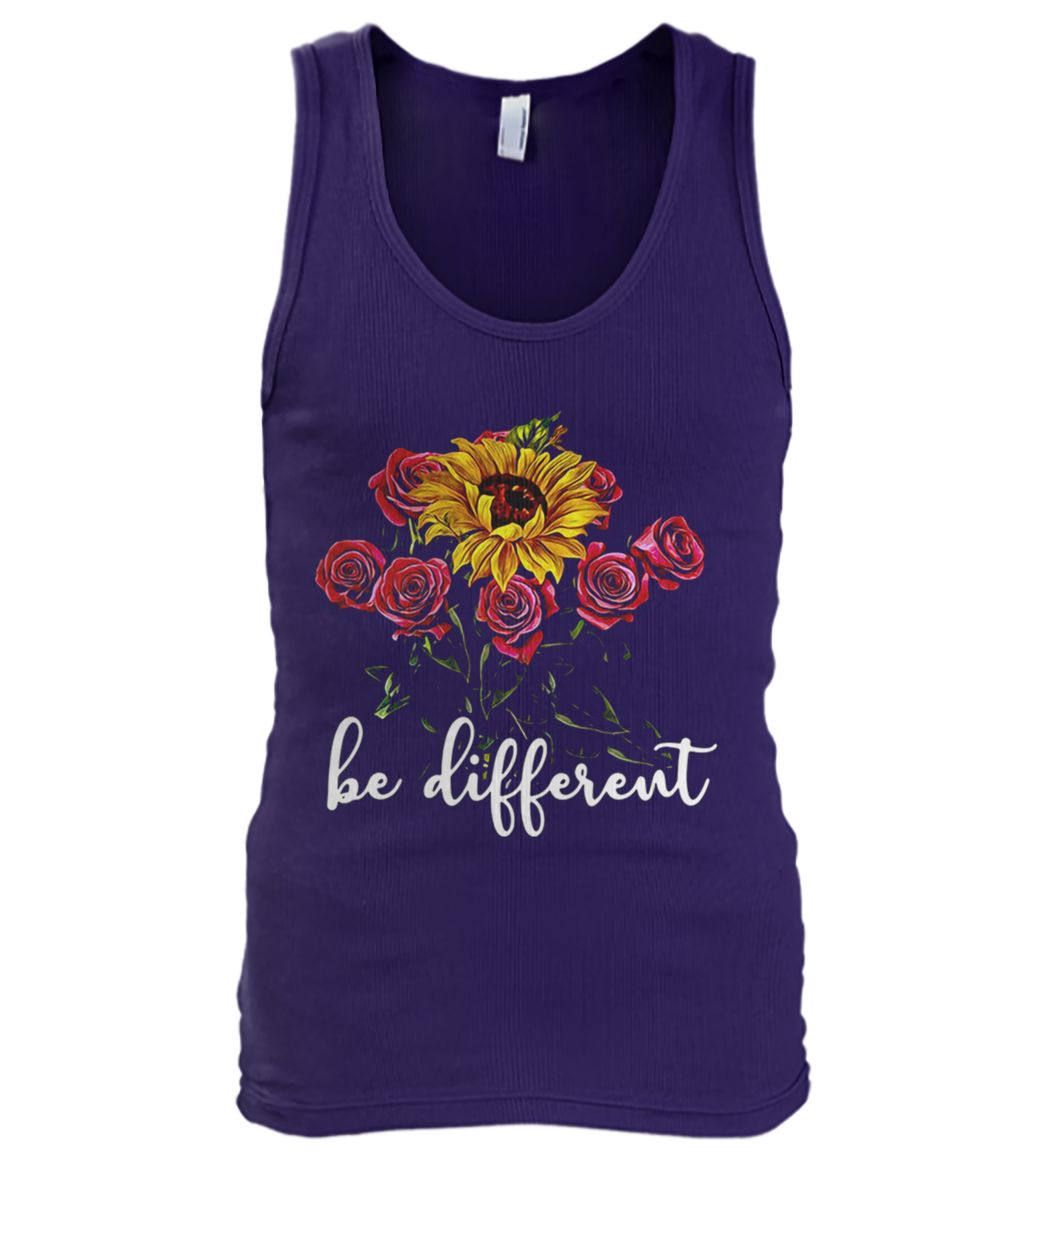 Sunflower and roses be different men's tank top